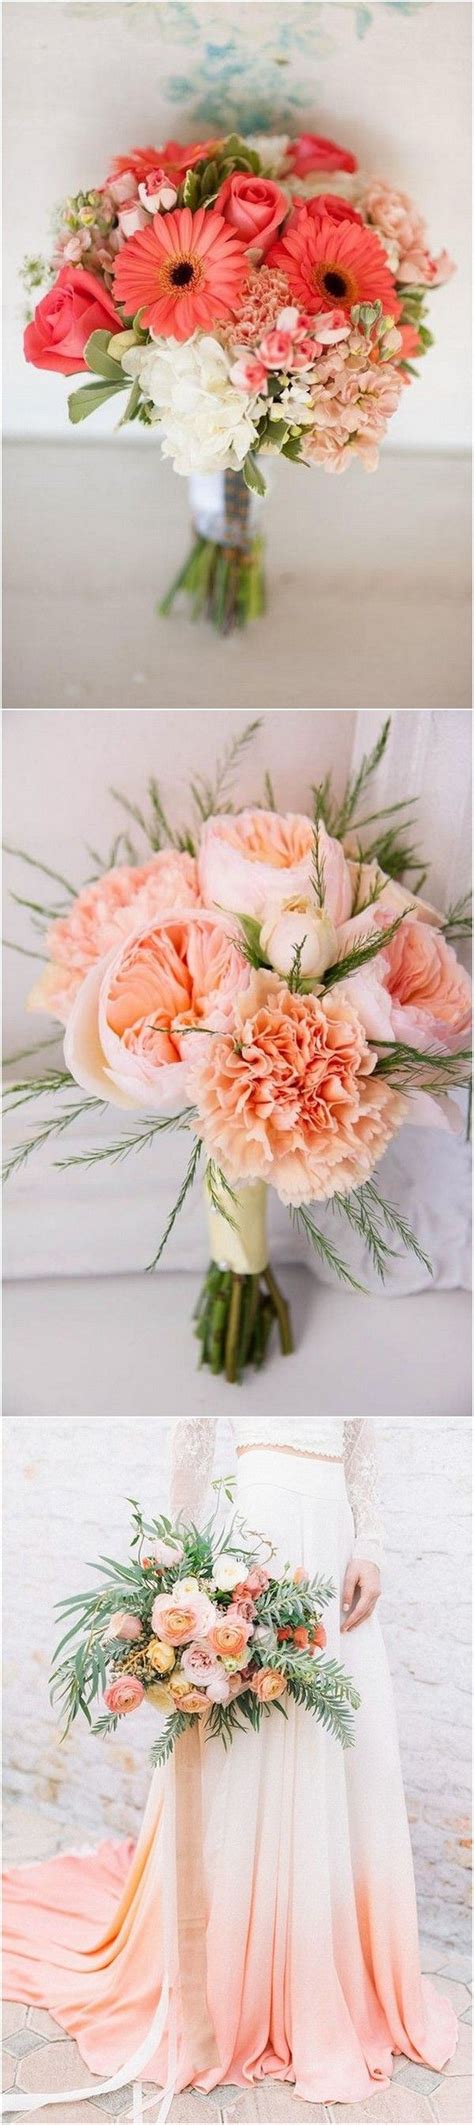 Pantone Color Of The Year 2019 26 Living Coral Wedding Ideas Emma